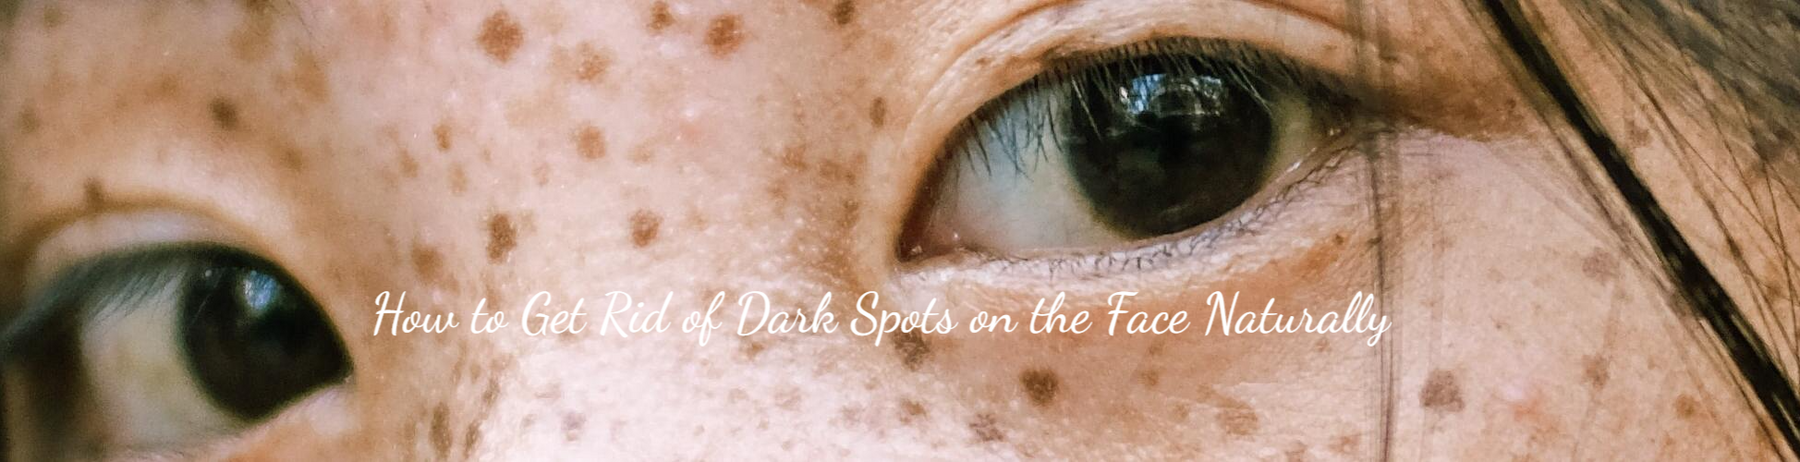 How to Get Rid of Dark Spots on the Face Naturally